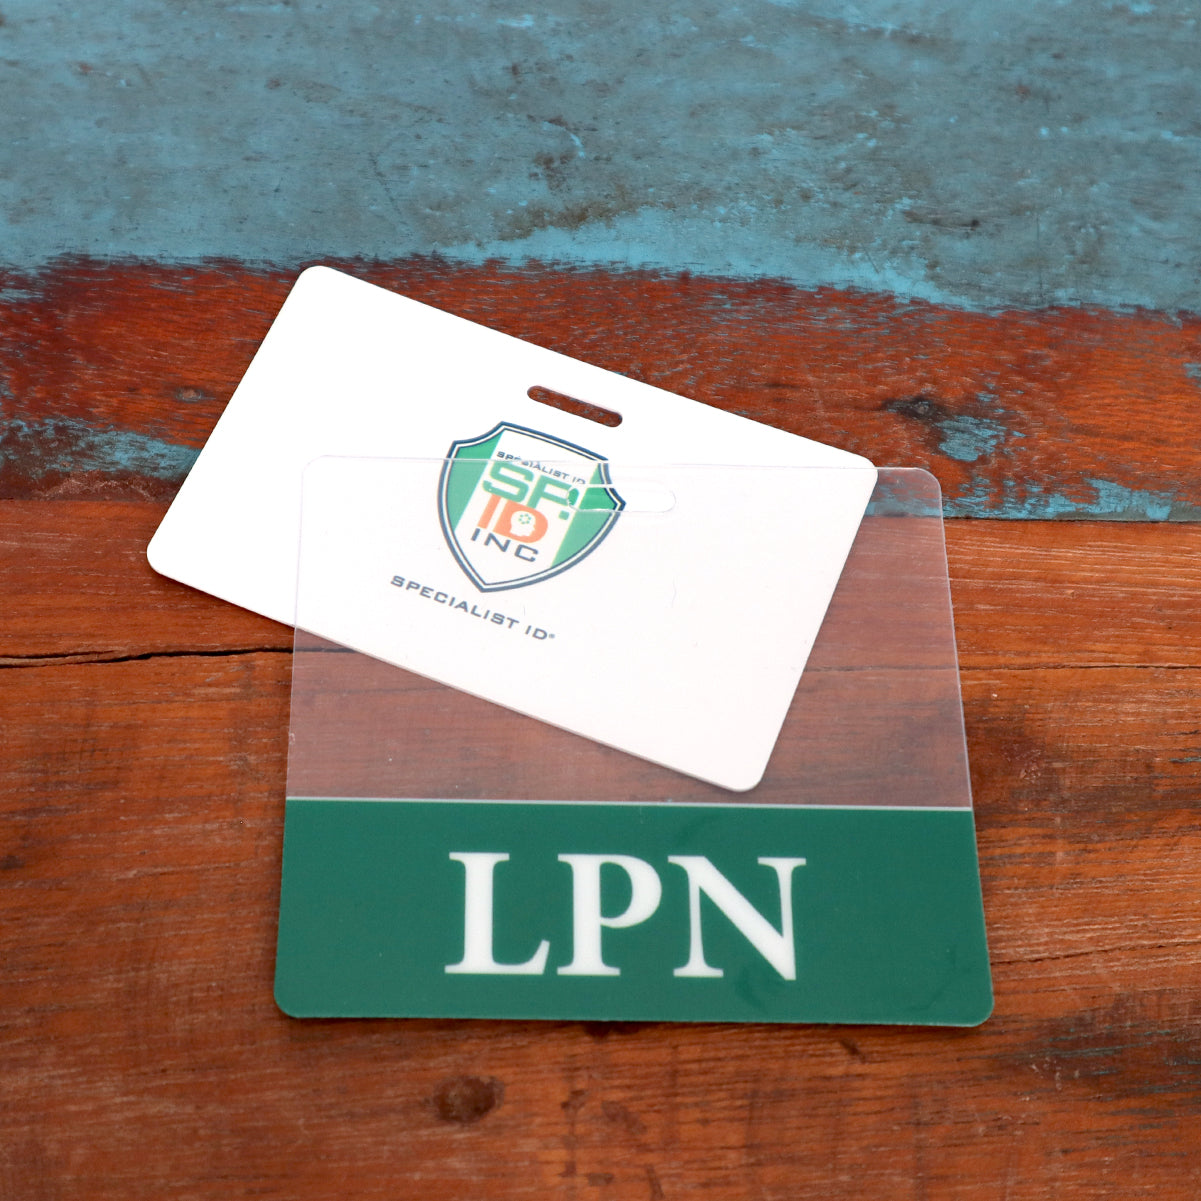 Two identification cards are placed against a weathered wooden surface. One card has "LPN" written at the bottom, clearly displaying a Clear LPN Badge Buddy - Horizontal ID Badge Backer for Licensed Practical Nurses - Double Sided Print, while the other card showcases a logo and the text "Specialist ID." This setup is ideal for any healthcare setting.